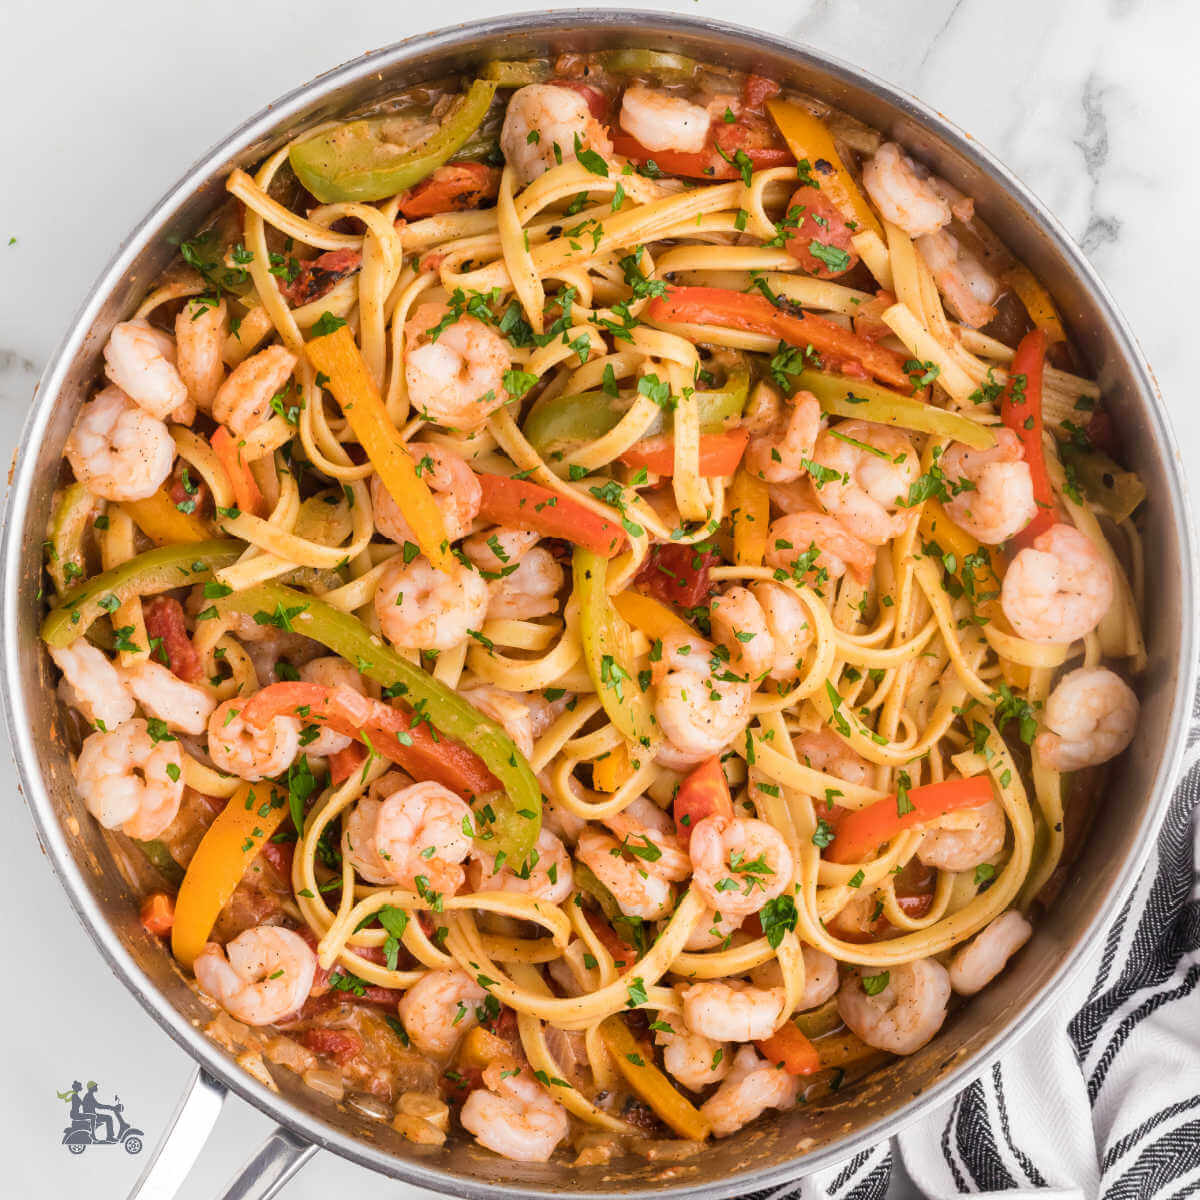 Shrimp rasta pasta in a large skillet comprising of colored peppers, shrimp, and pasta.